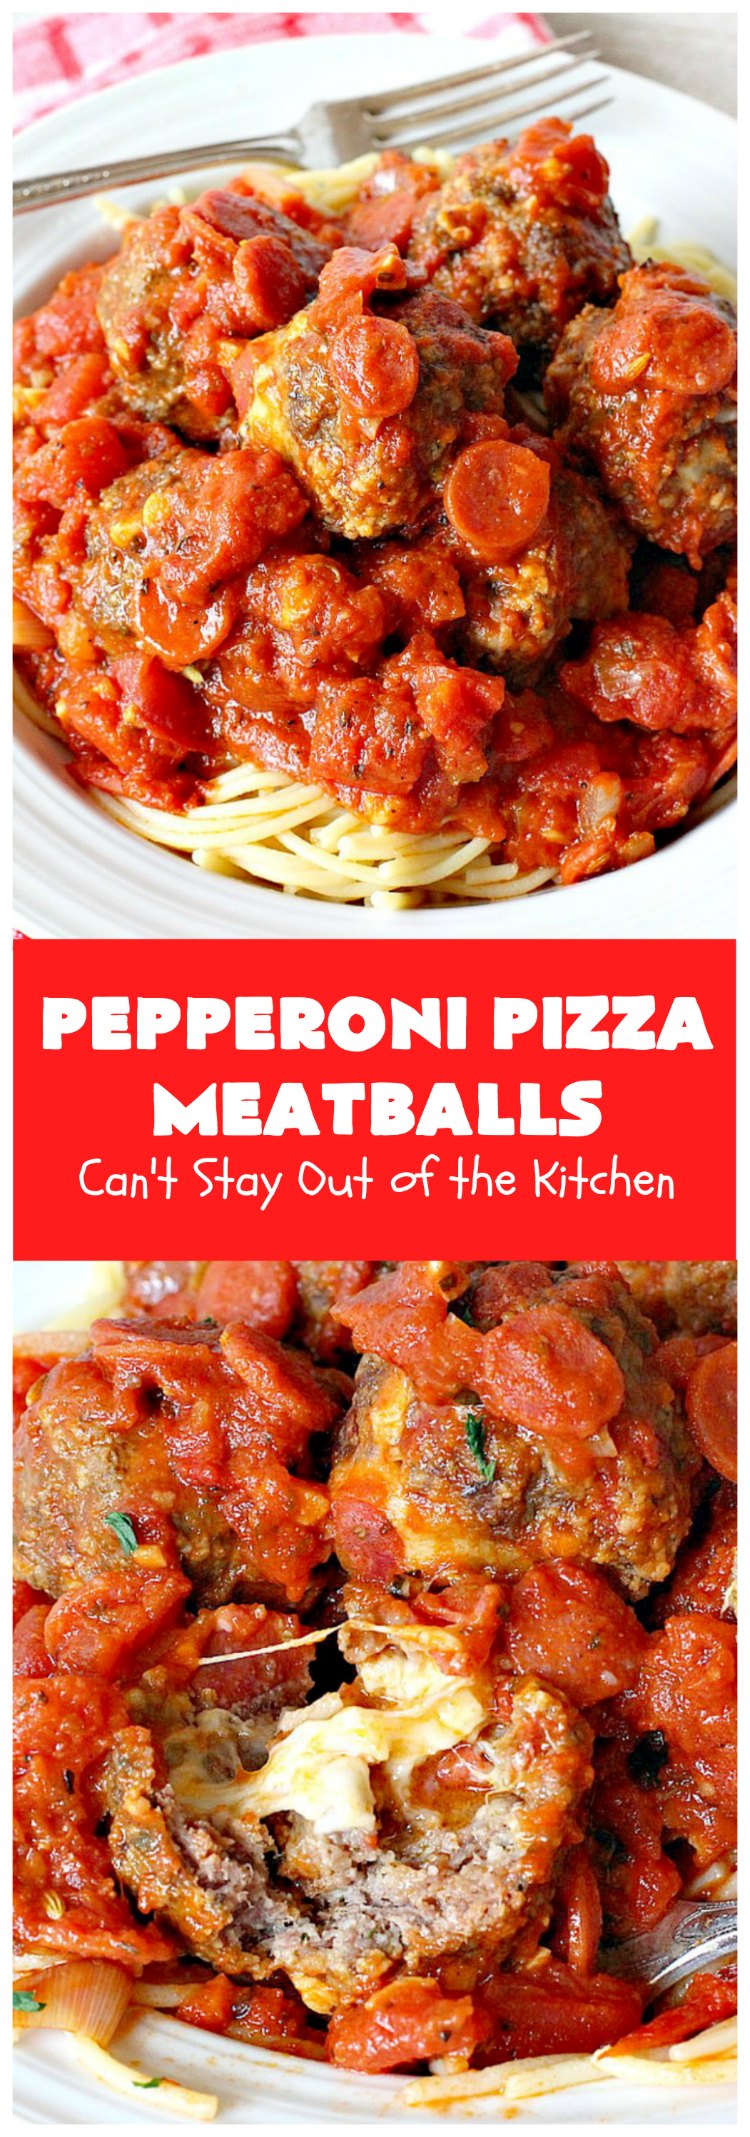 Pepperoni Pizza Meatballs | Can't Stay Out of the Kitchen | This is like eating #PepperoniPizza but in #meatball form! These fabulous #StuffedMeatballs are filled with #pepperoni & #MozzarellaCheese cubes. The #marinara sauce also includes #pepperoni. Irresistible & mouthwatering. Recipe can be made #GlutenFree or not. #Italian #pasta #PepperoniPizzaMeatballs